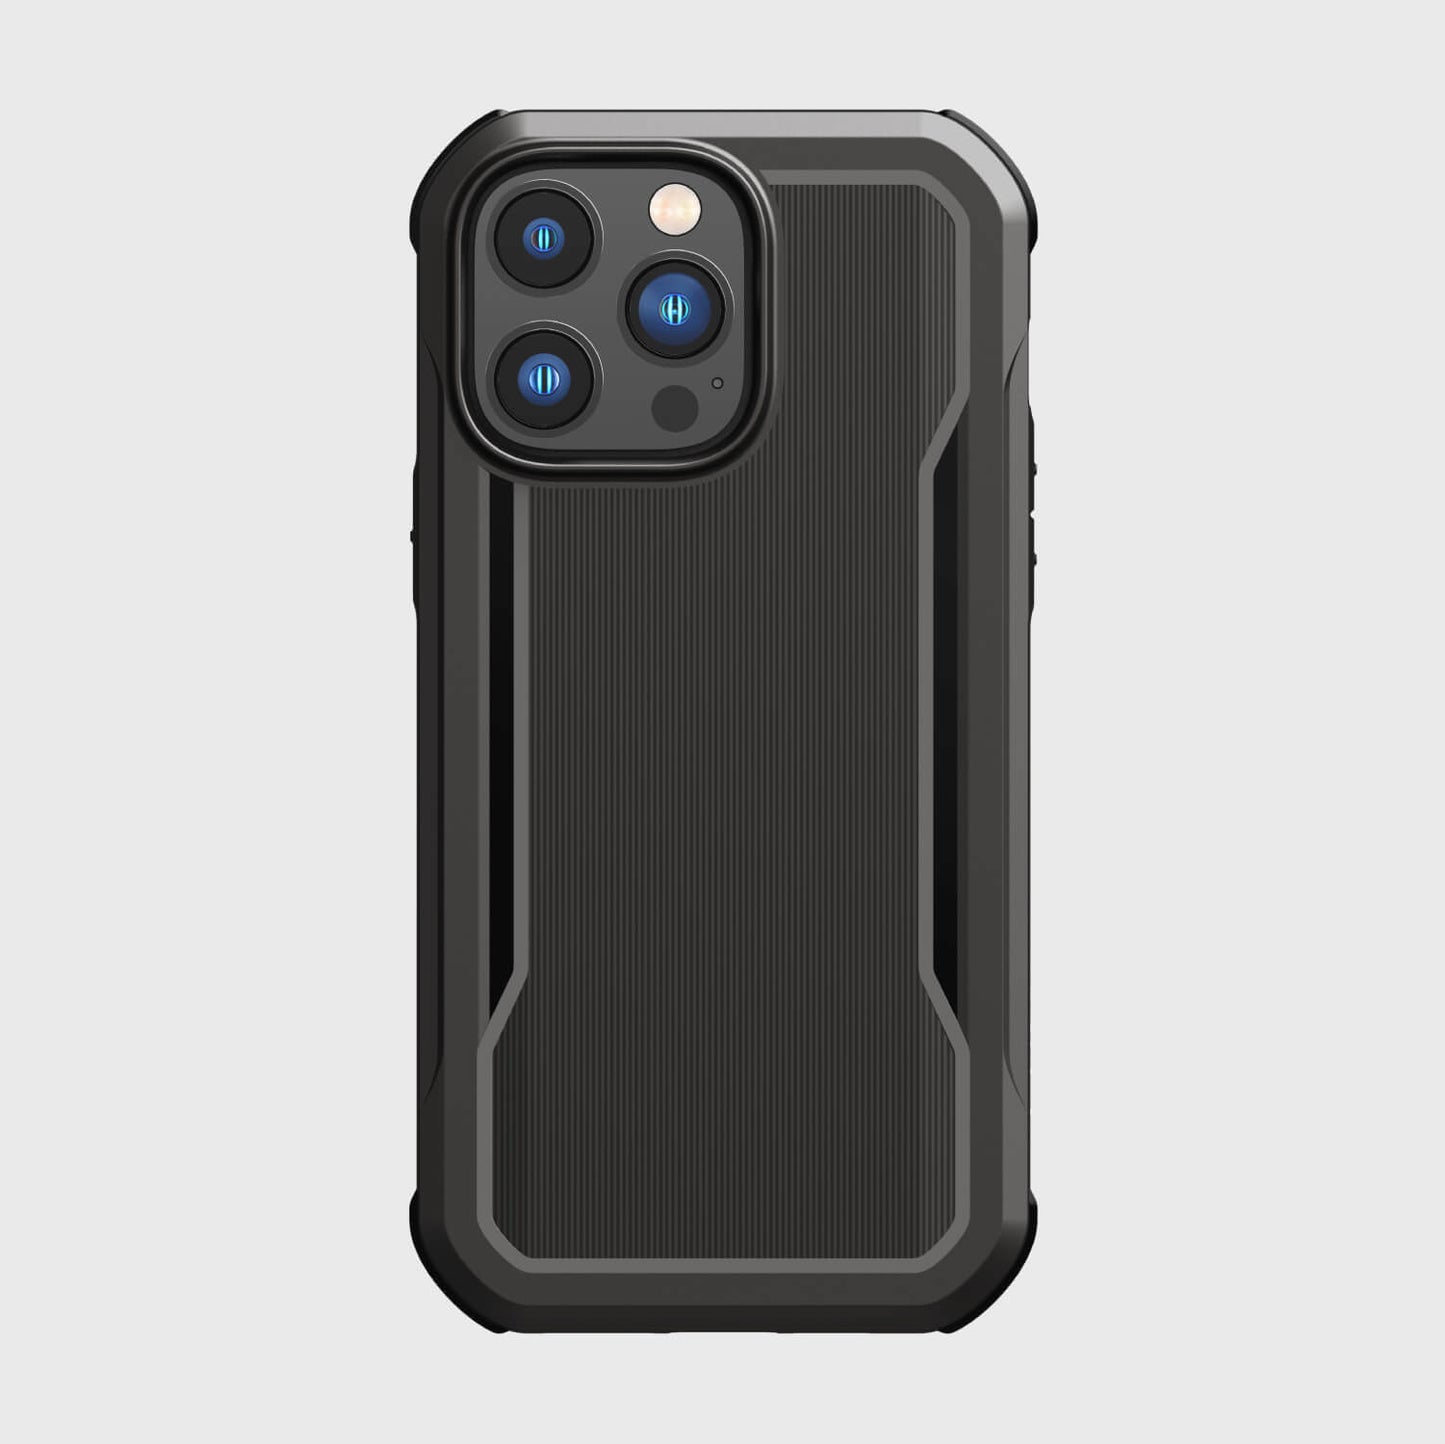 The biodegradable back of an iPhone 14/15 Pro Max Case - Fort Built for MagSafe case in black, providing military-grade drop protection and featuring MagSafe compatibility by Raptic.